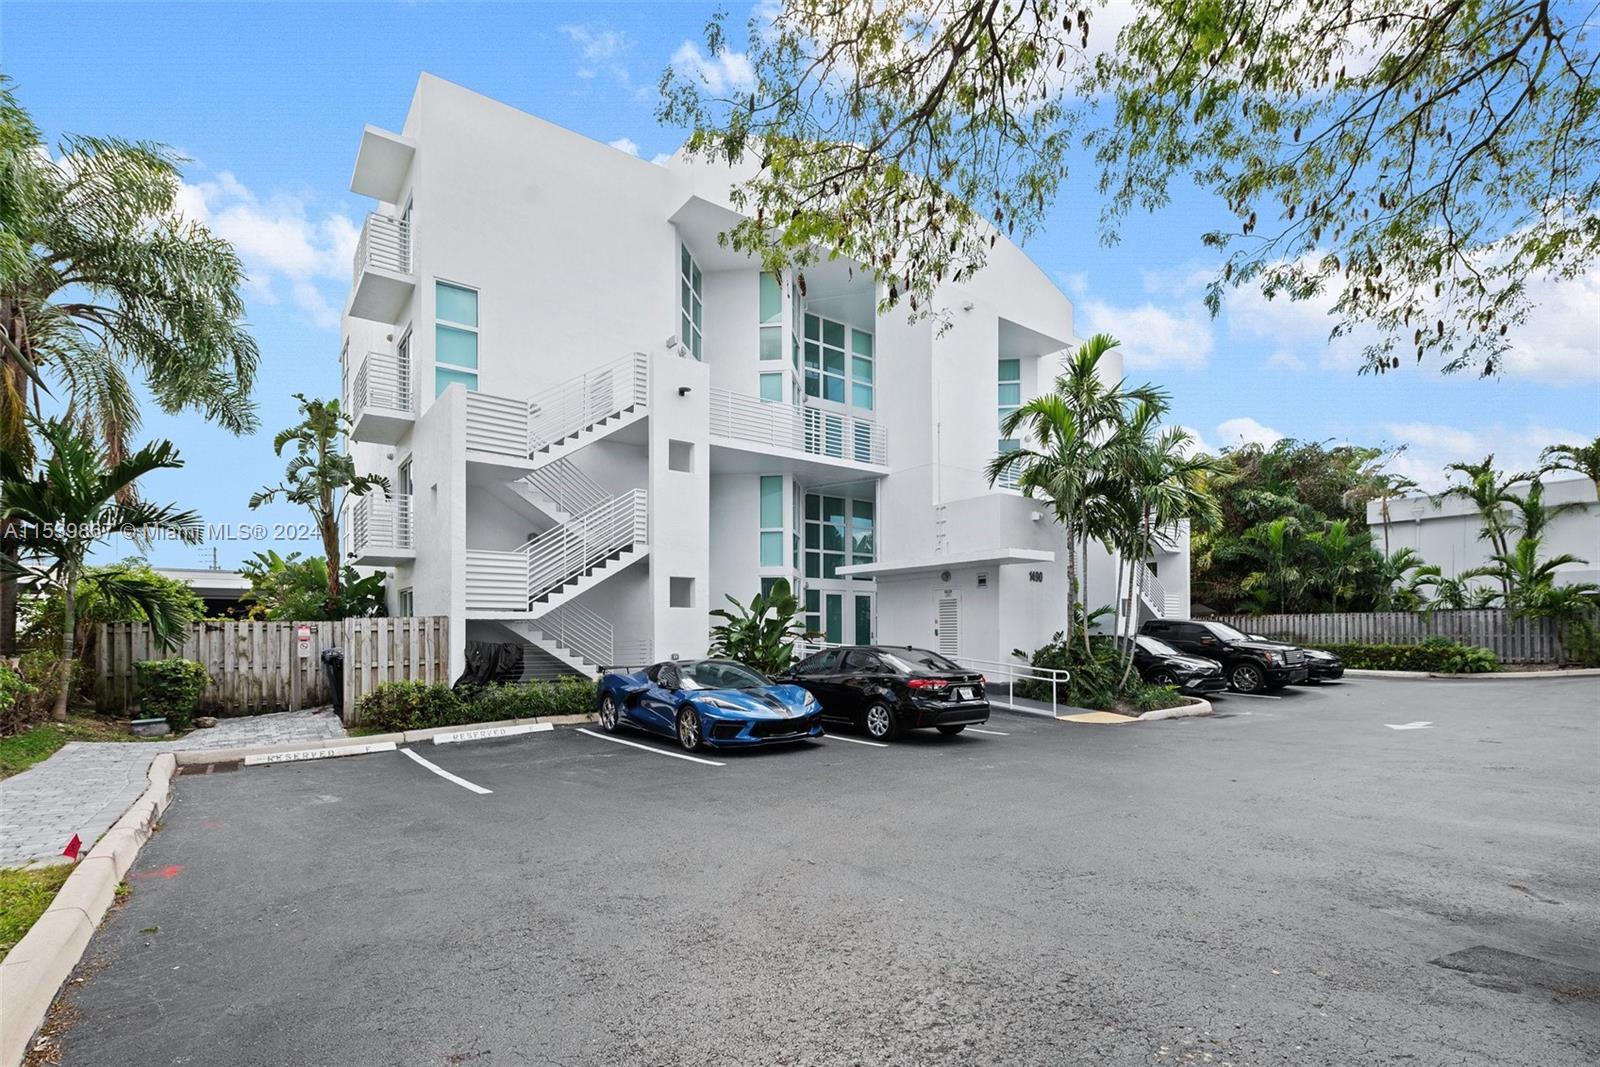 Photo of 1490 SE 15th St #201 in Fort Lauderdale, FL